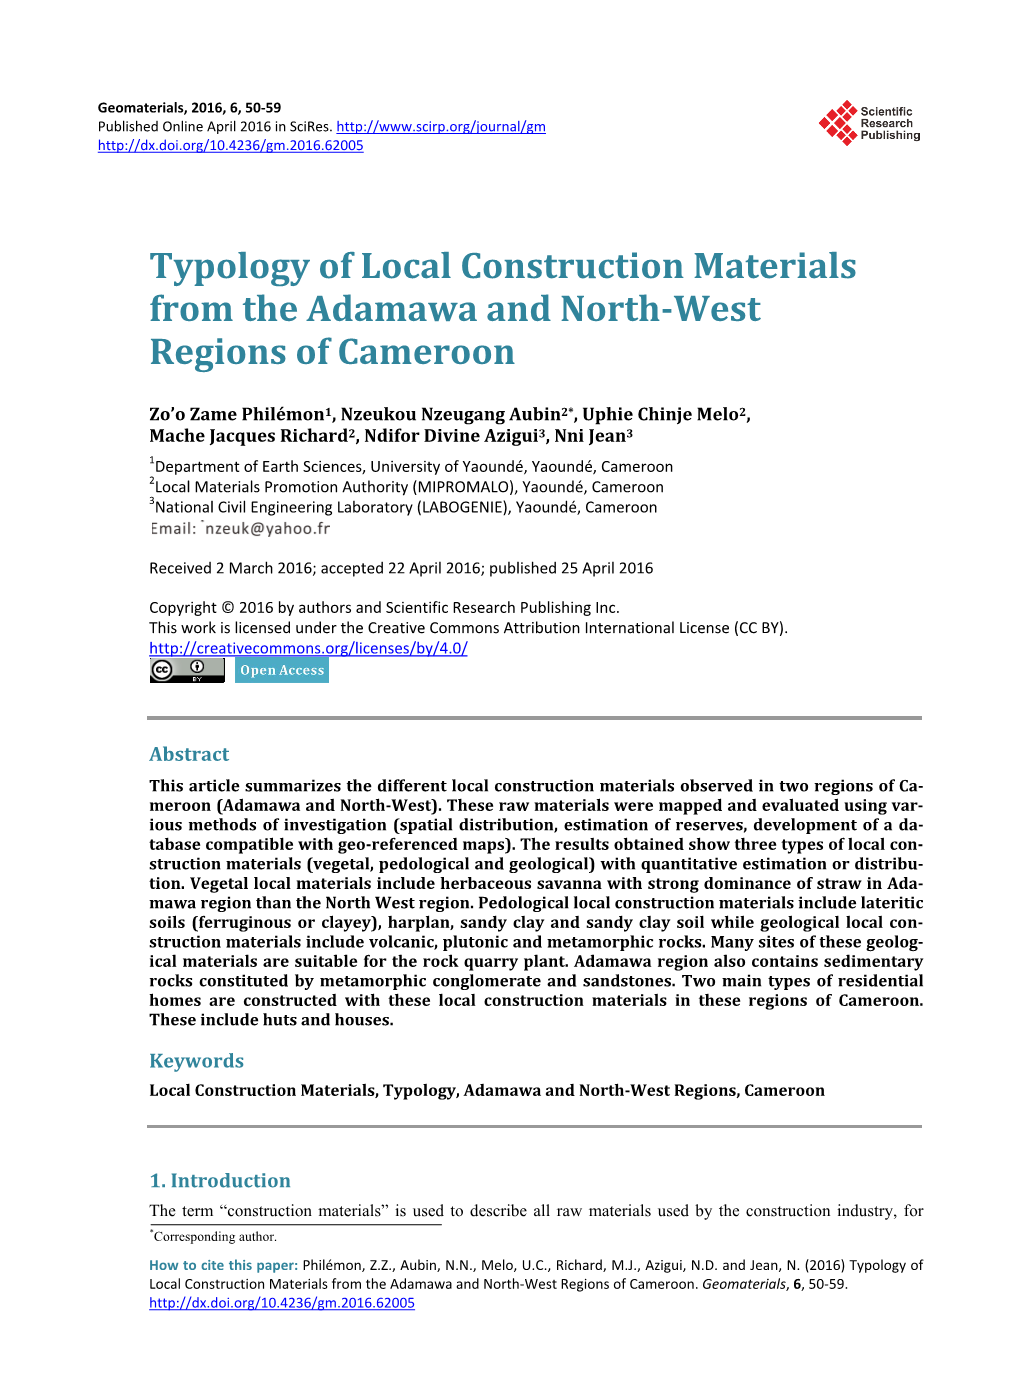 Typology of Local Construction Materials from the Adamawa and North-West Regions of Cameroon